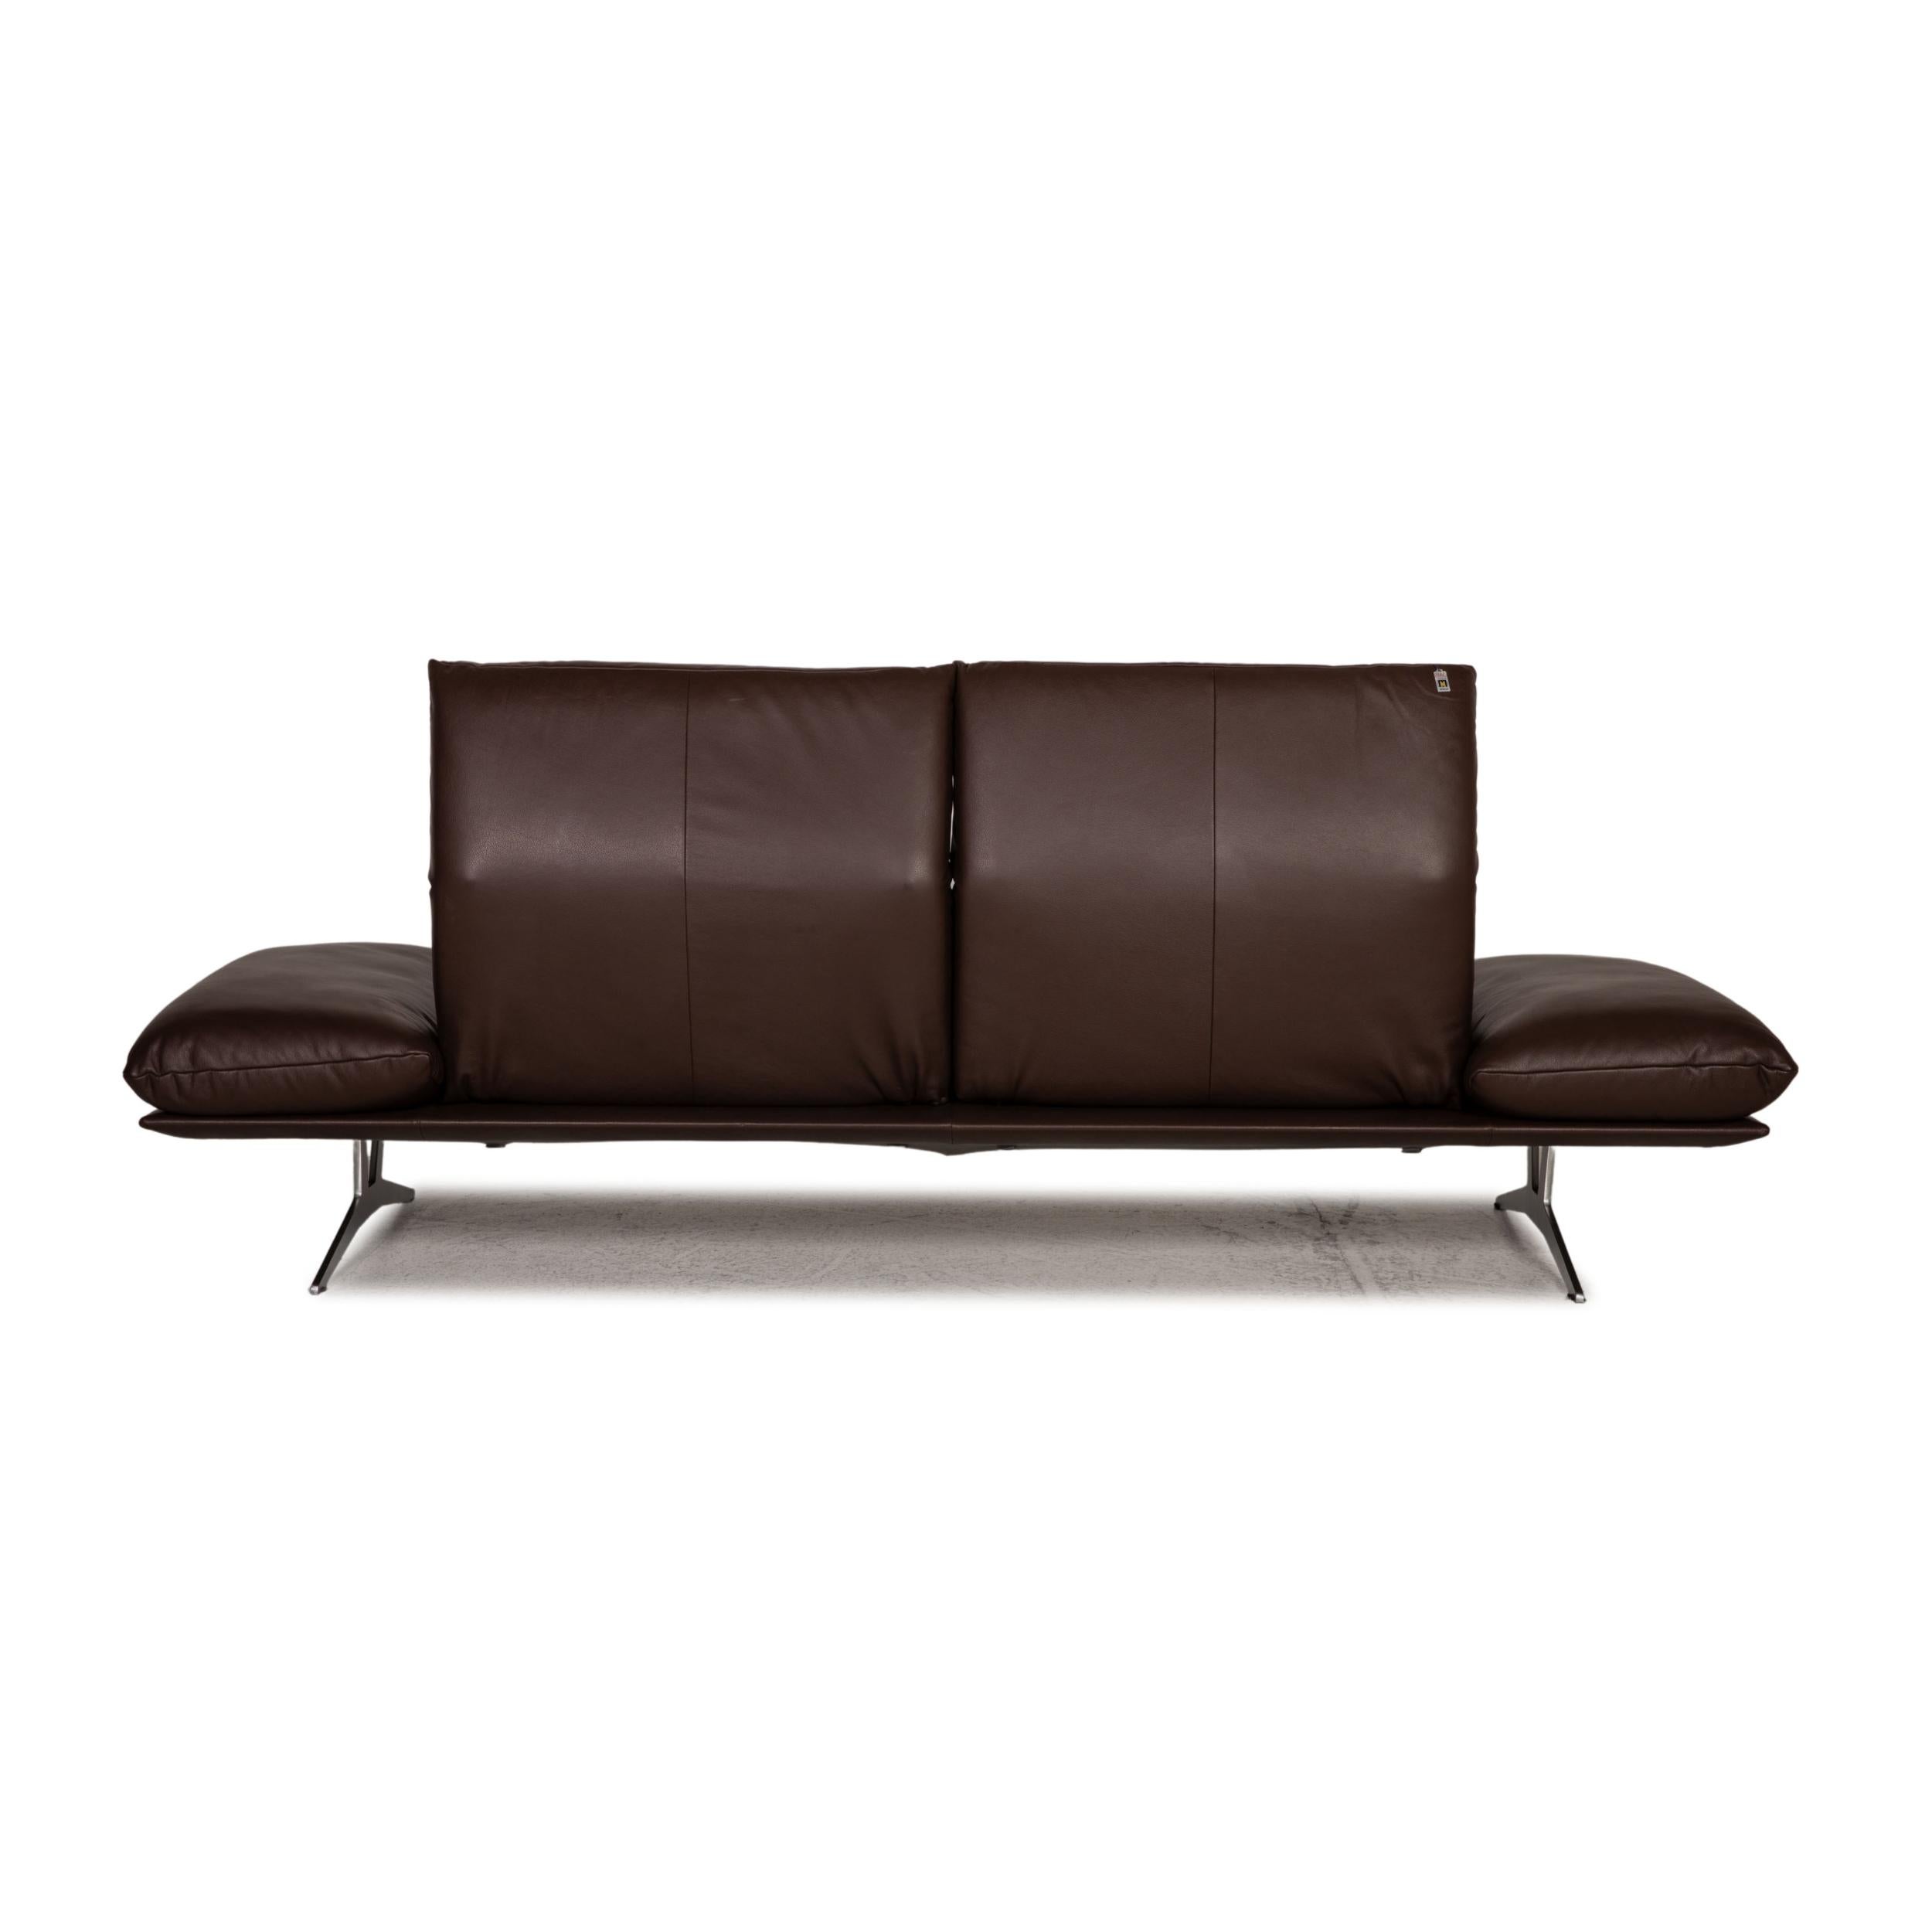 Koinor Francis Leather Sofa Brown Three Seater Couch Function For Sale 1